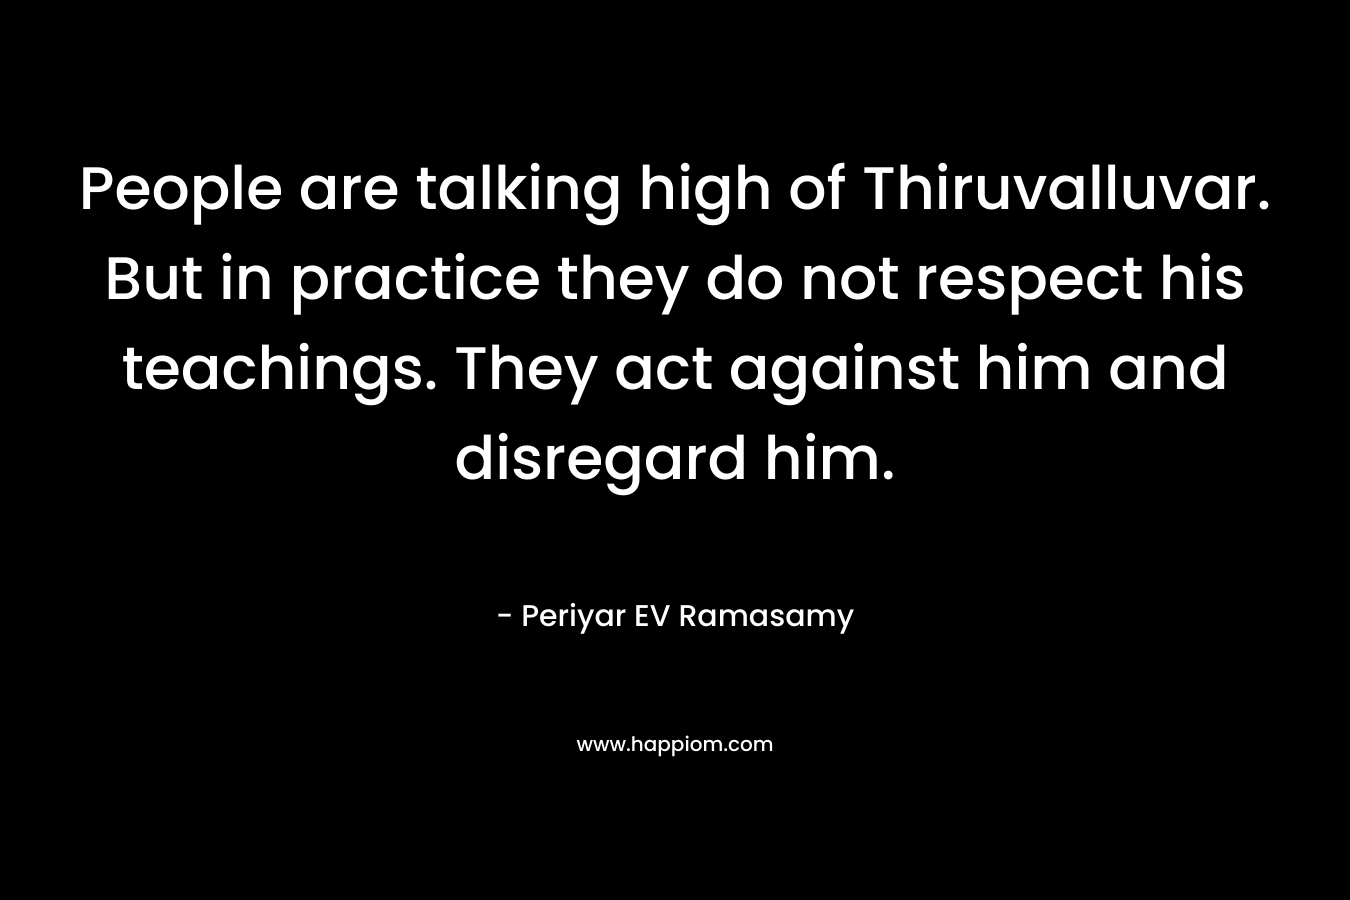 People are talking high of Thiruvalluvar. But in practice they do not respect his teachings. They act against him and disregard him.